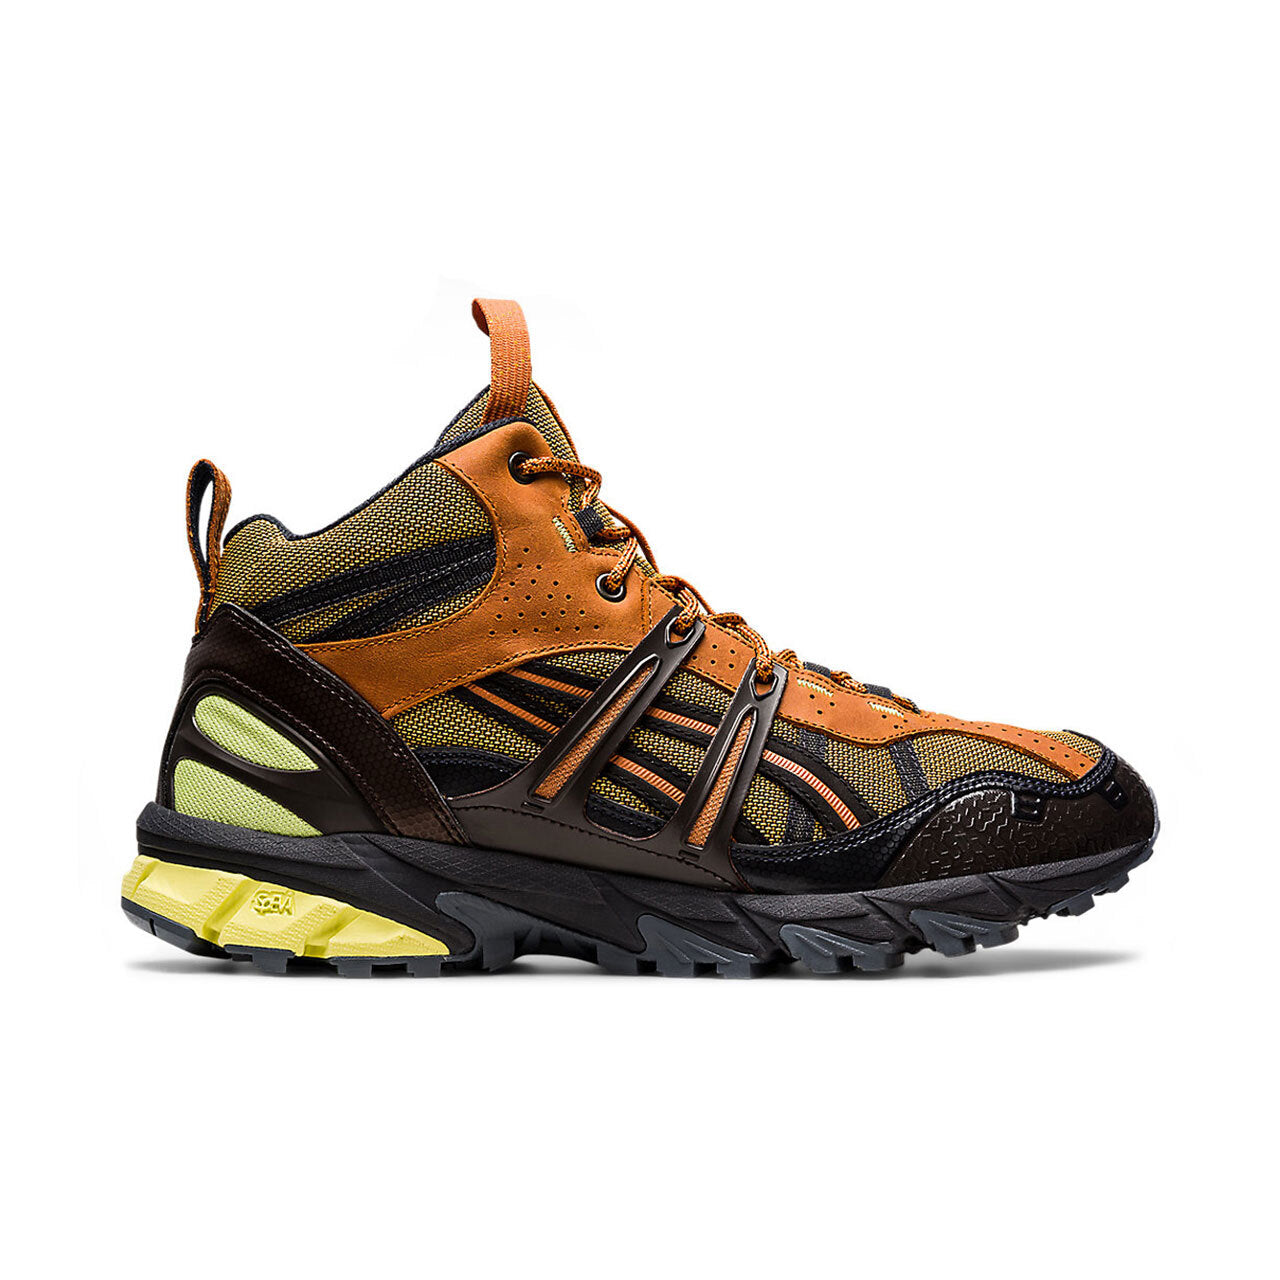 US2-S MT Trail Boots | Uncrate